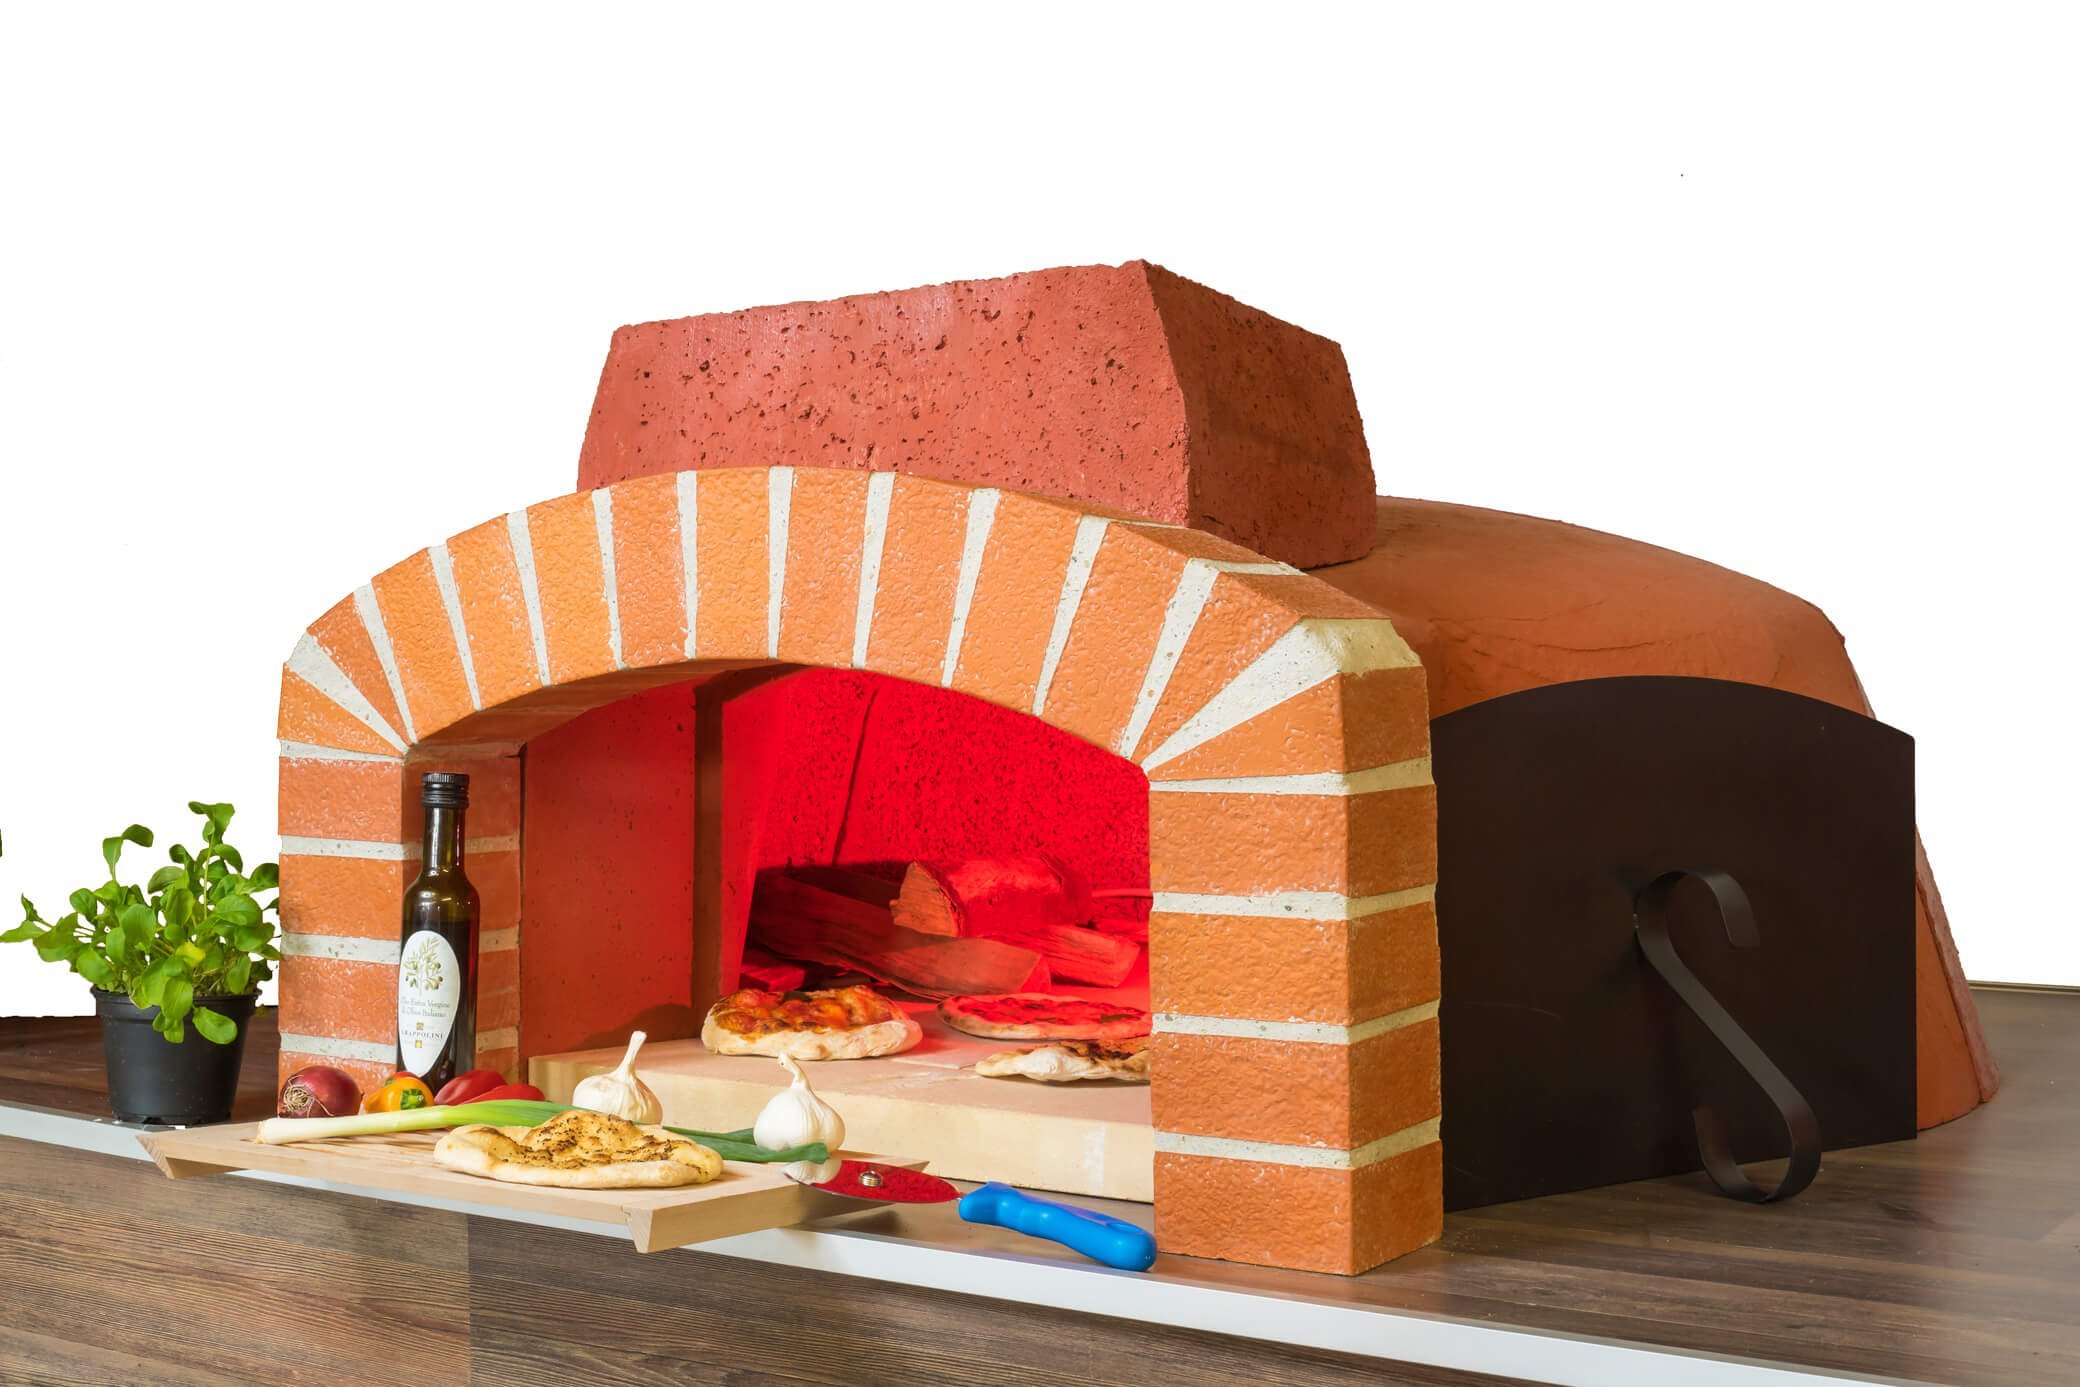 Pizza oven kit Valoriani FVR with smoke connection, brick arch and insulation set